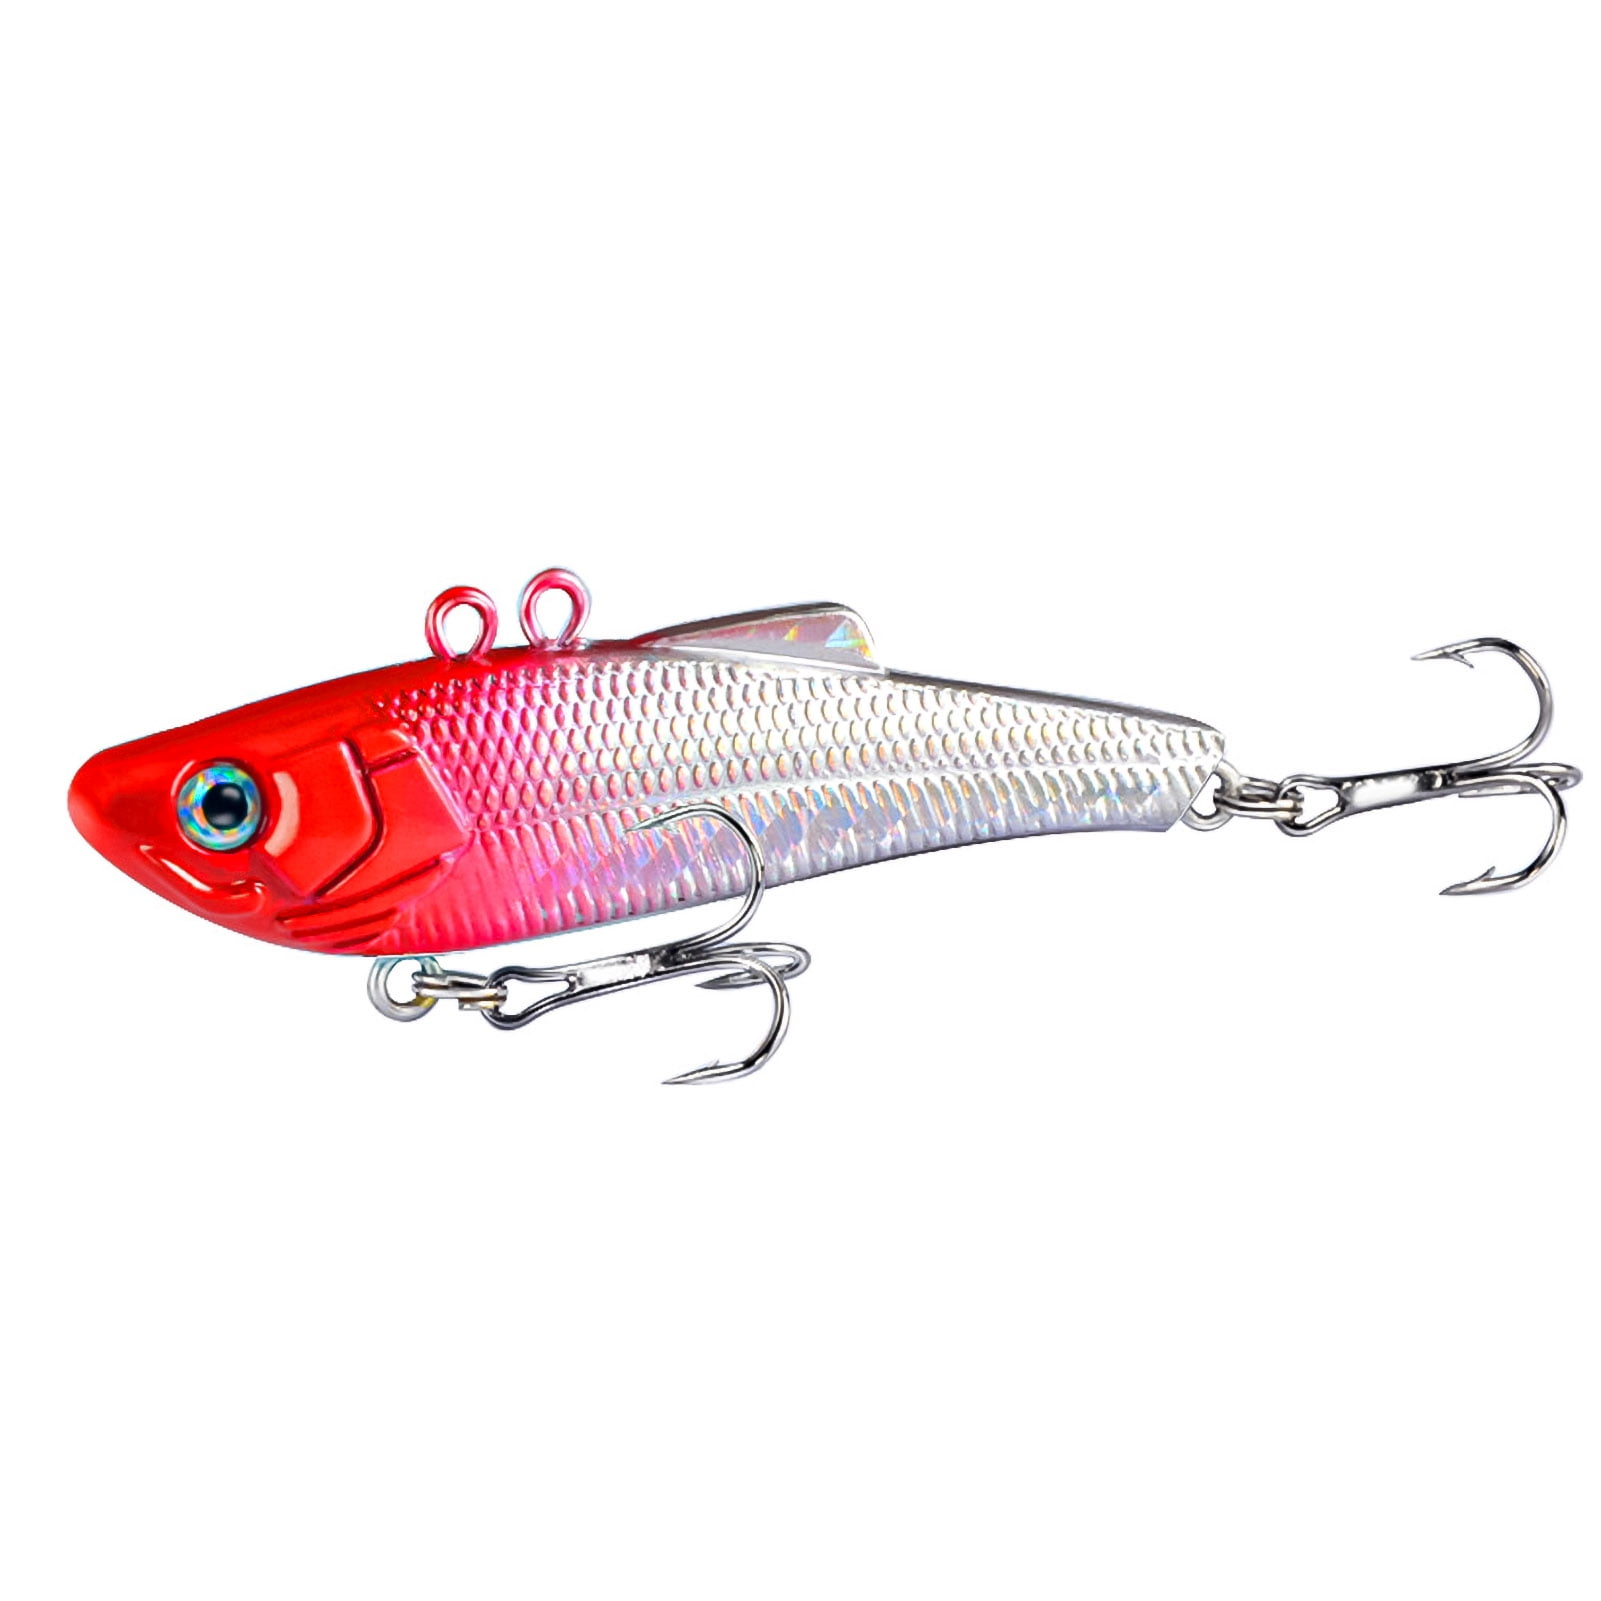 Mann's Bait Company Little George Fishing Lure, Chartreuse, 0.5 Oz. 